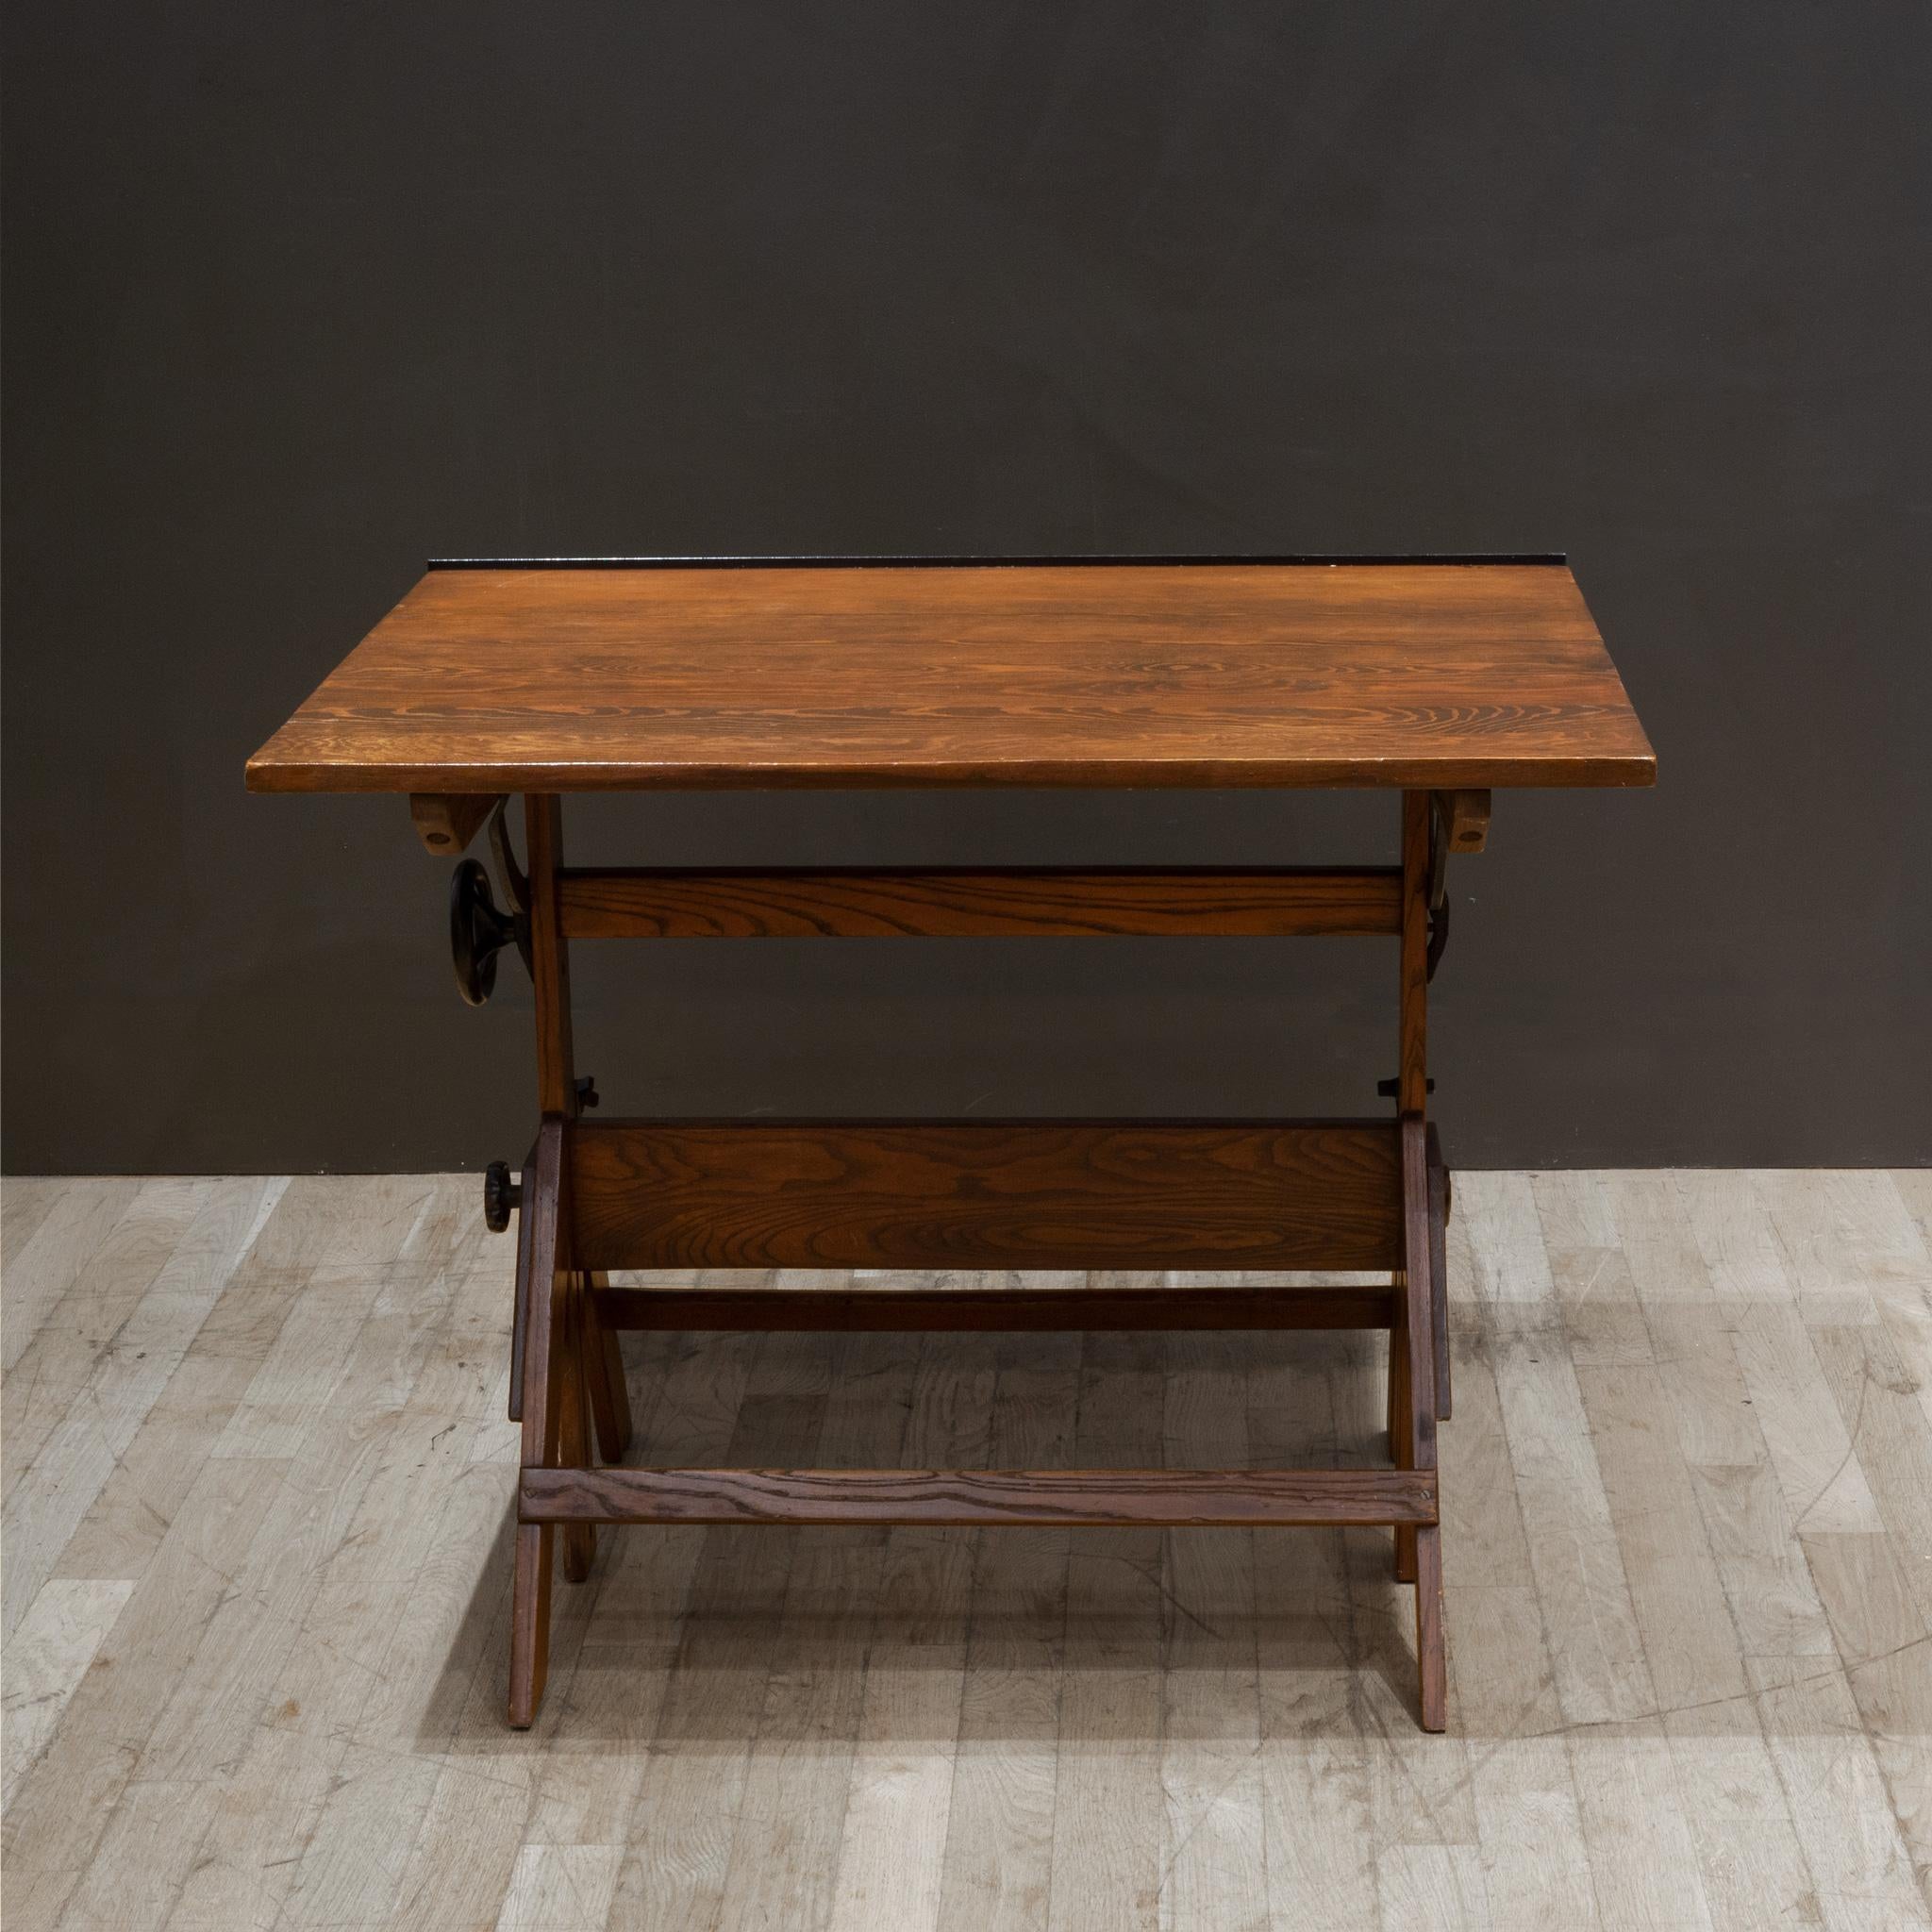 American Vintage Anco Bilt Cast Iron and Wood Drafting Table/Desk c.1950 For Sale